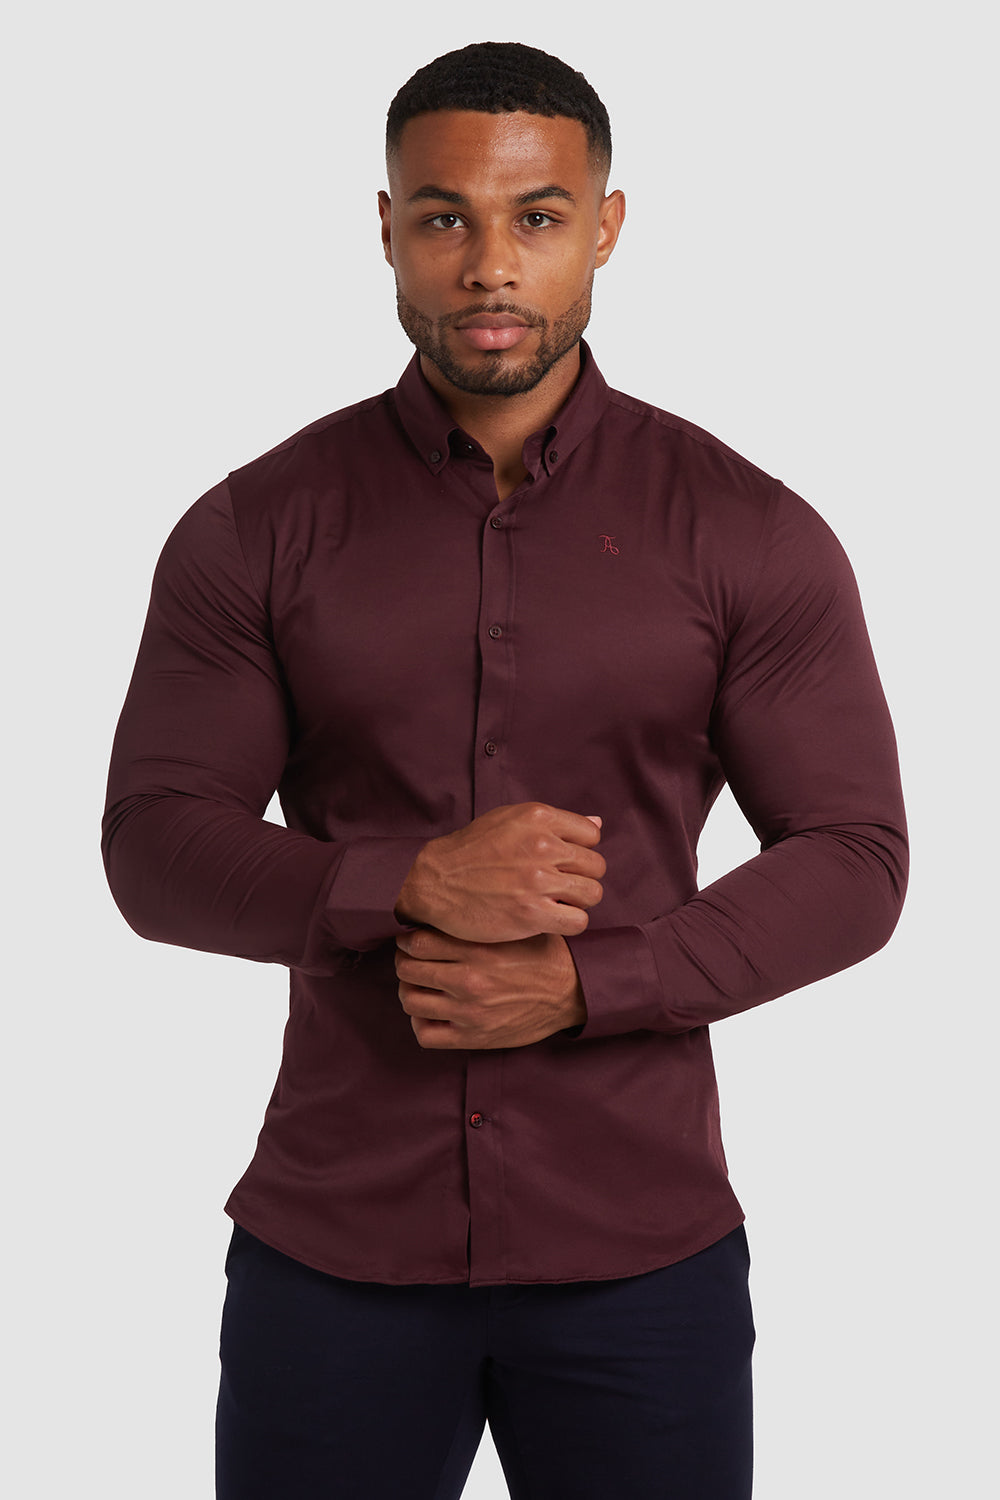 Muscle Fit Signature Shirt 2.0 Burgundy - TAILORED USA - ATHLETE in